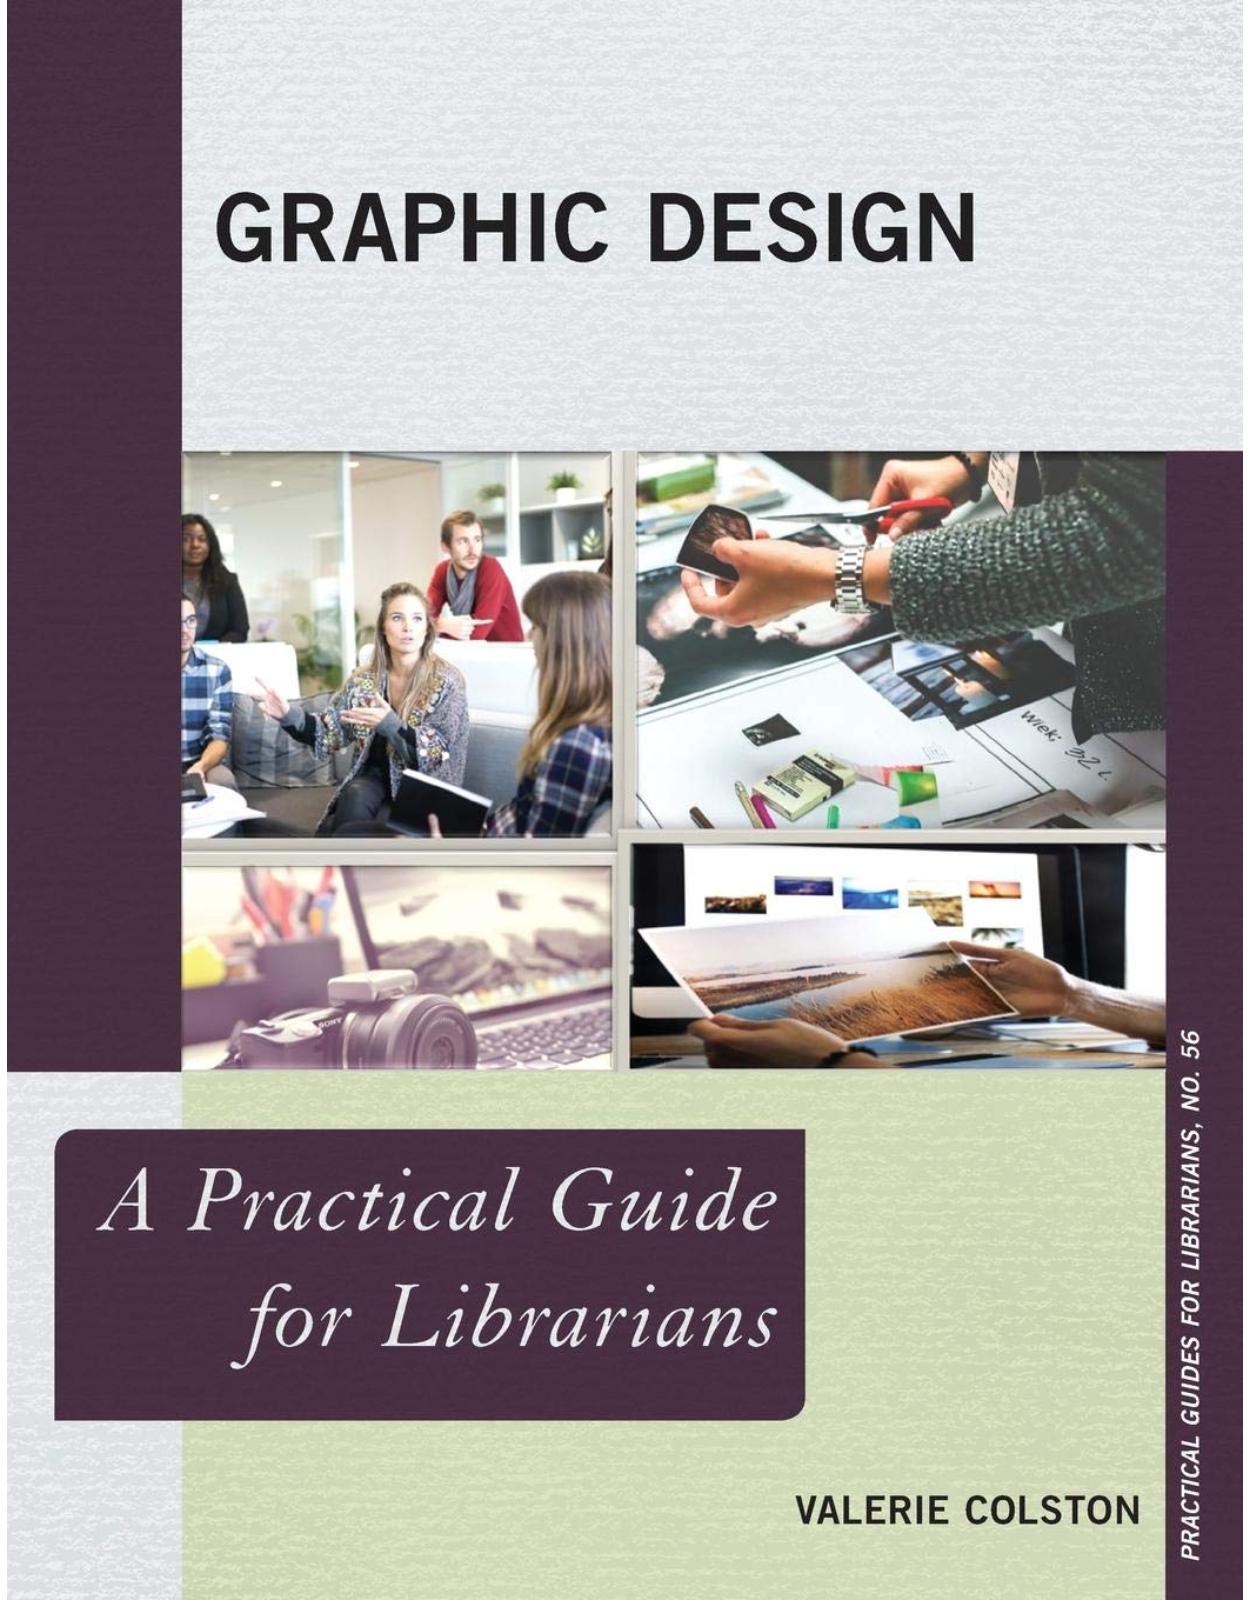 Graphic Design. A Practical Guide for Librarians